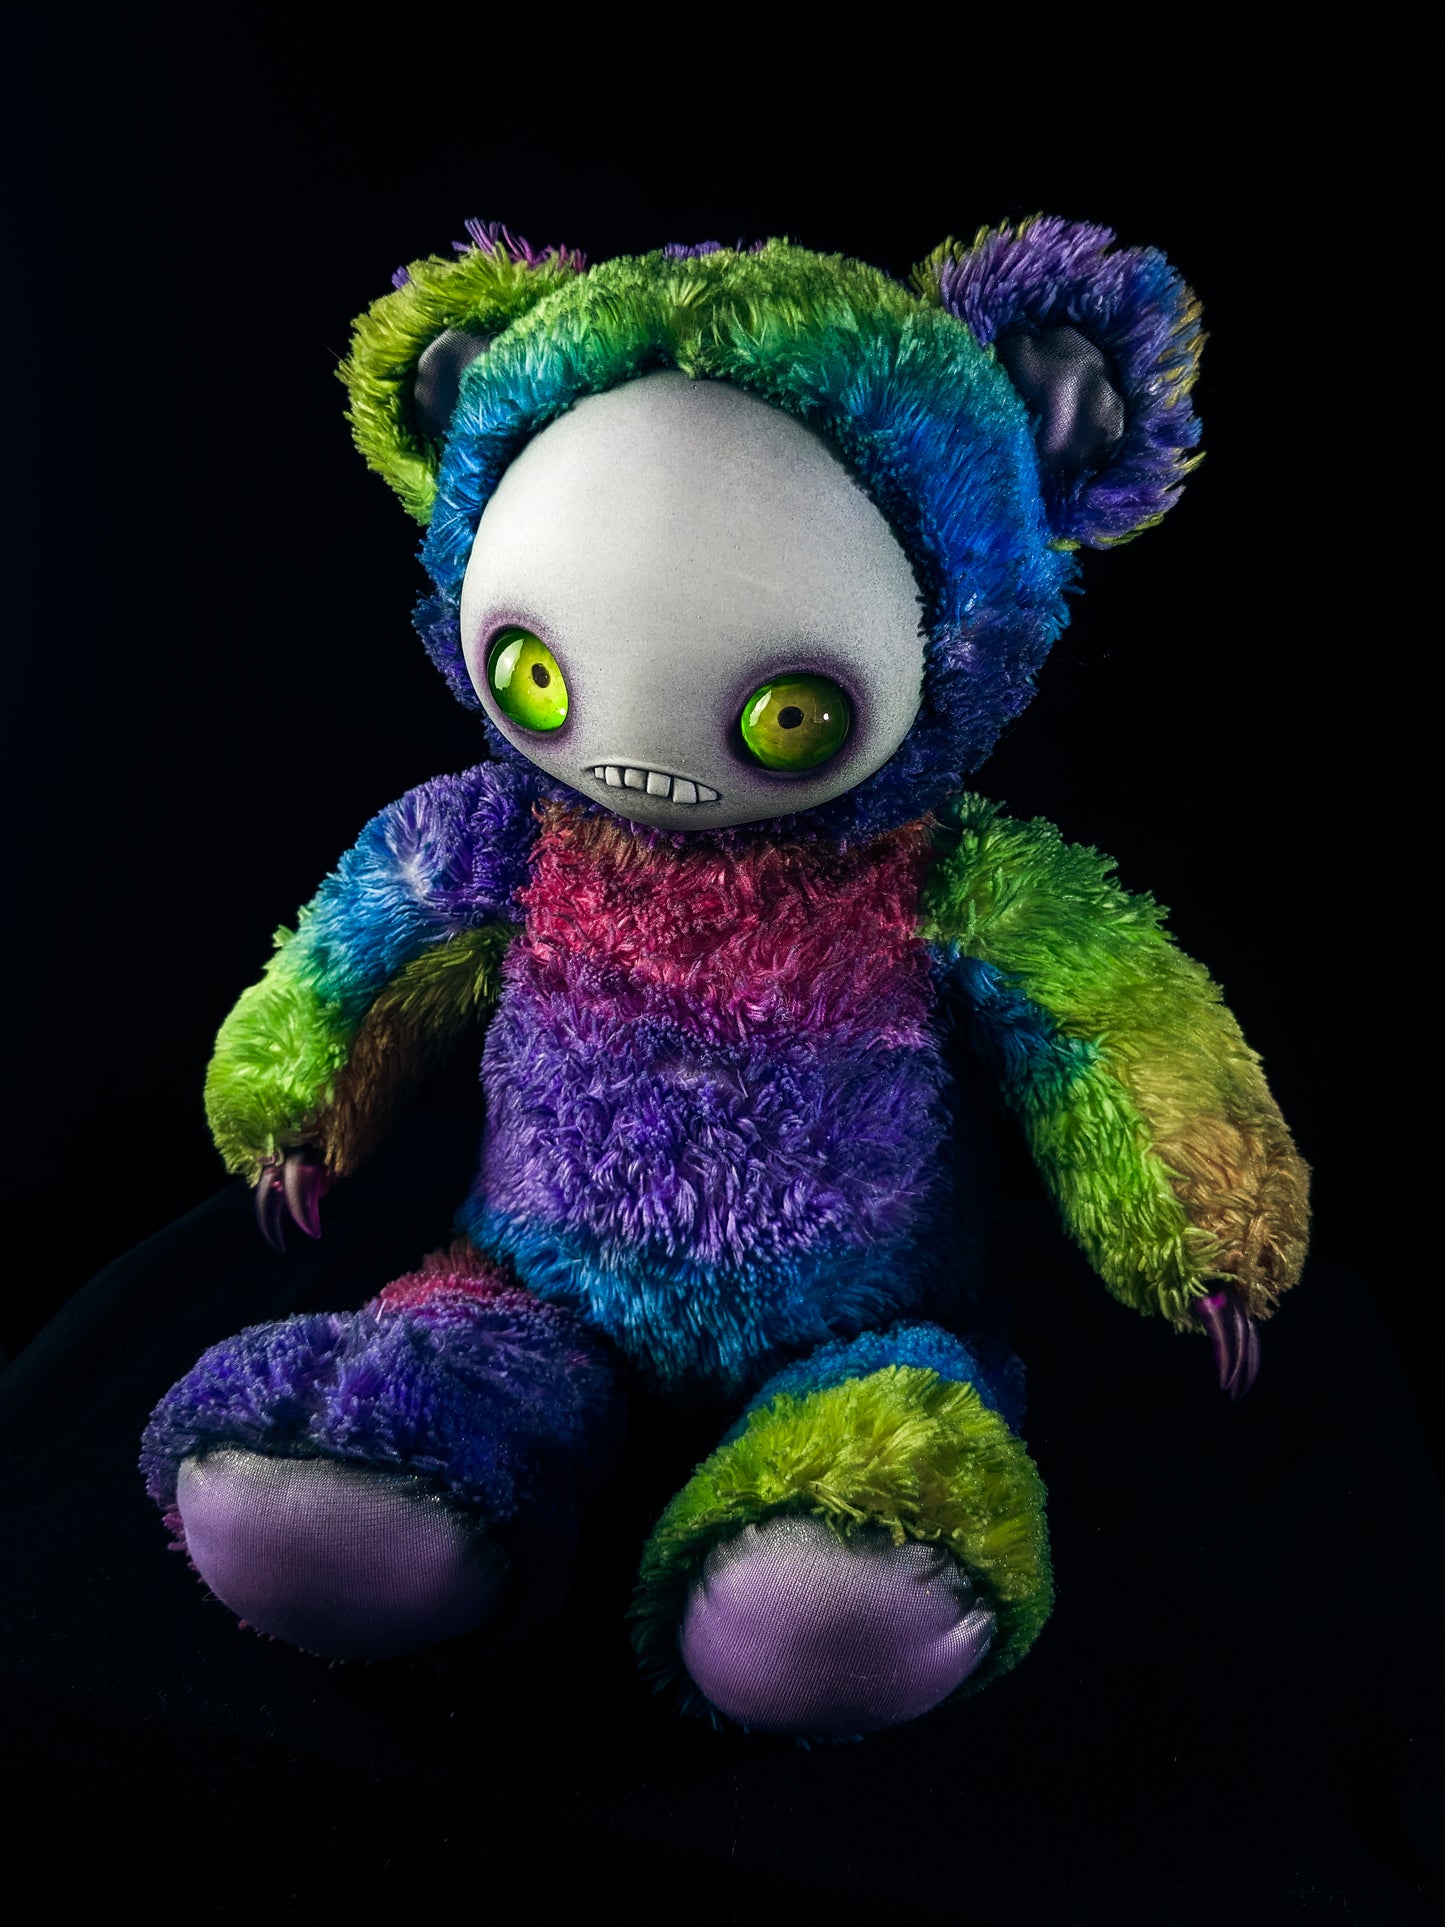 Psychedelic Haze: JITTERS - CRYPTCRITS Handcrafted Creepy Monster Art Doll Plush Toy for Unhinged Individuals